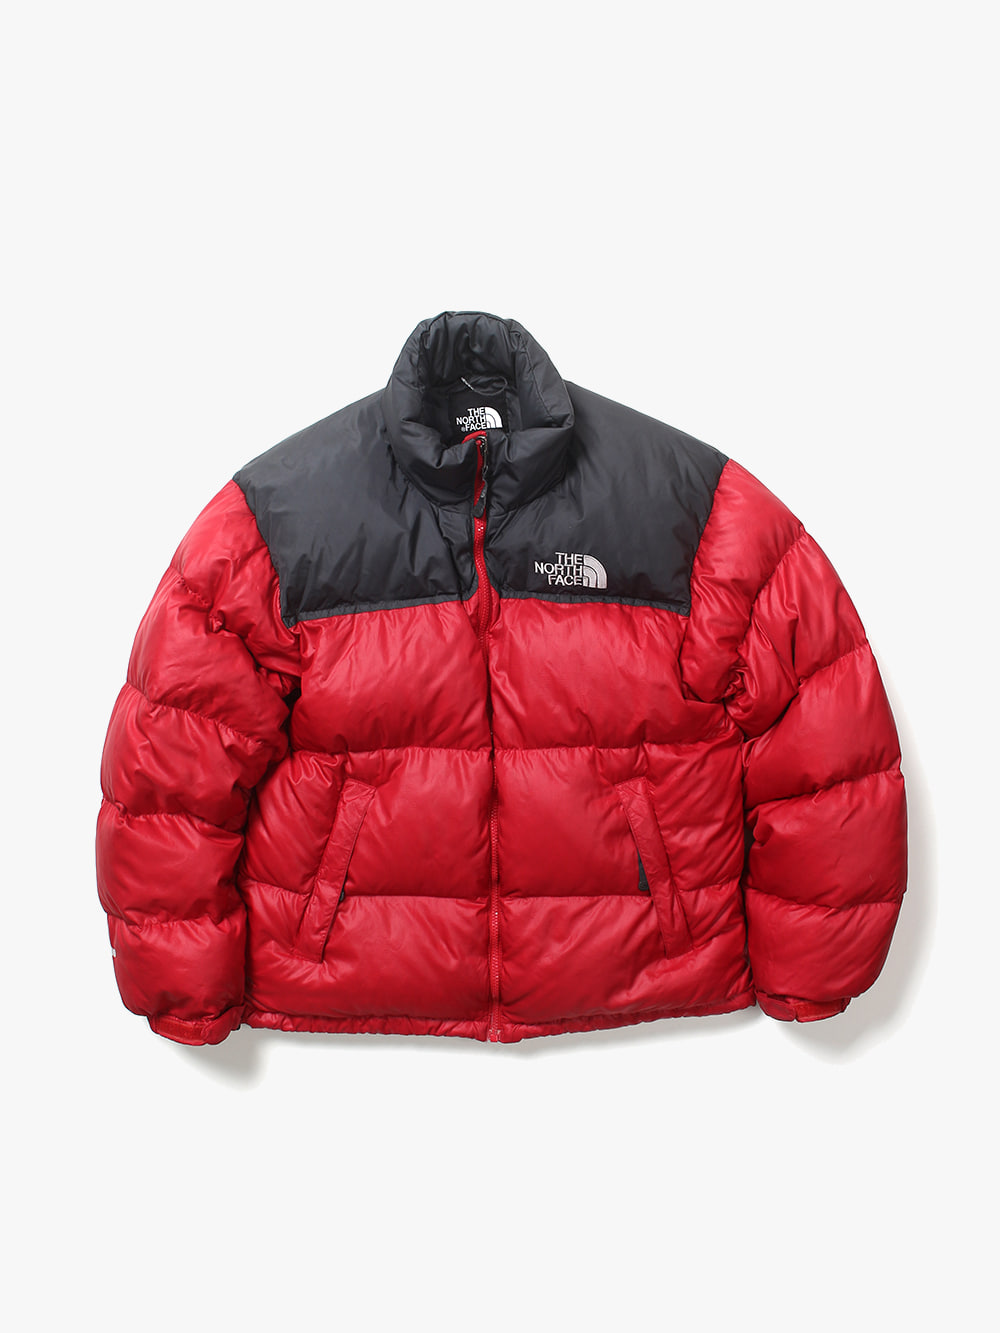 THE NORTH FACE 700 PADDING (3745)